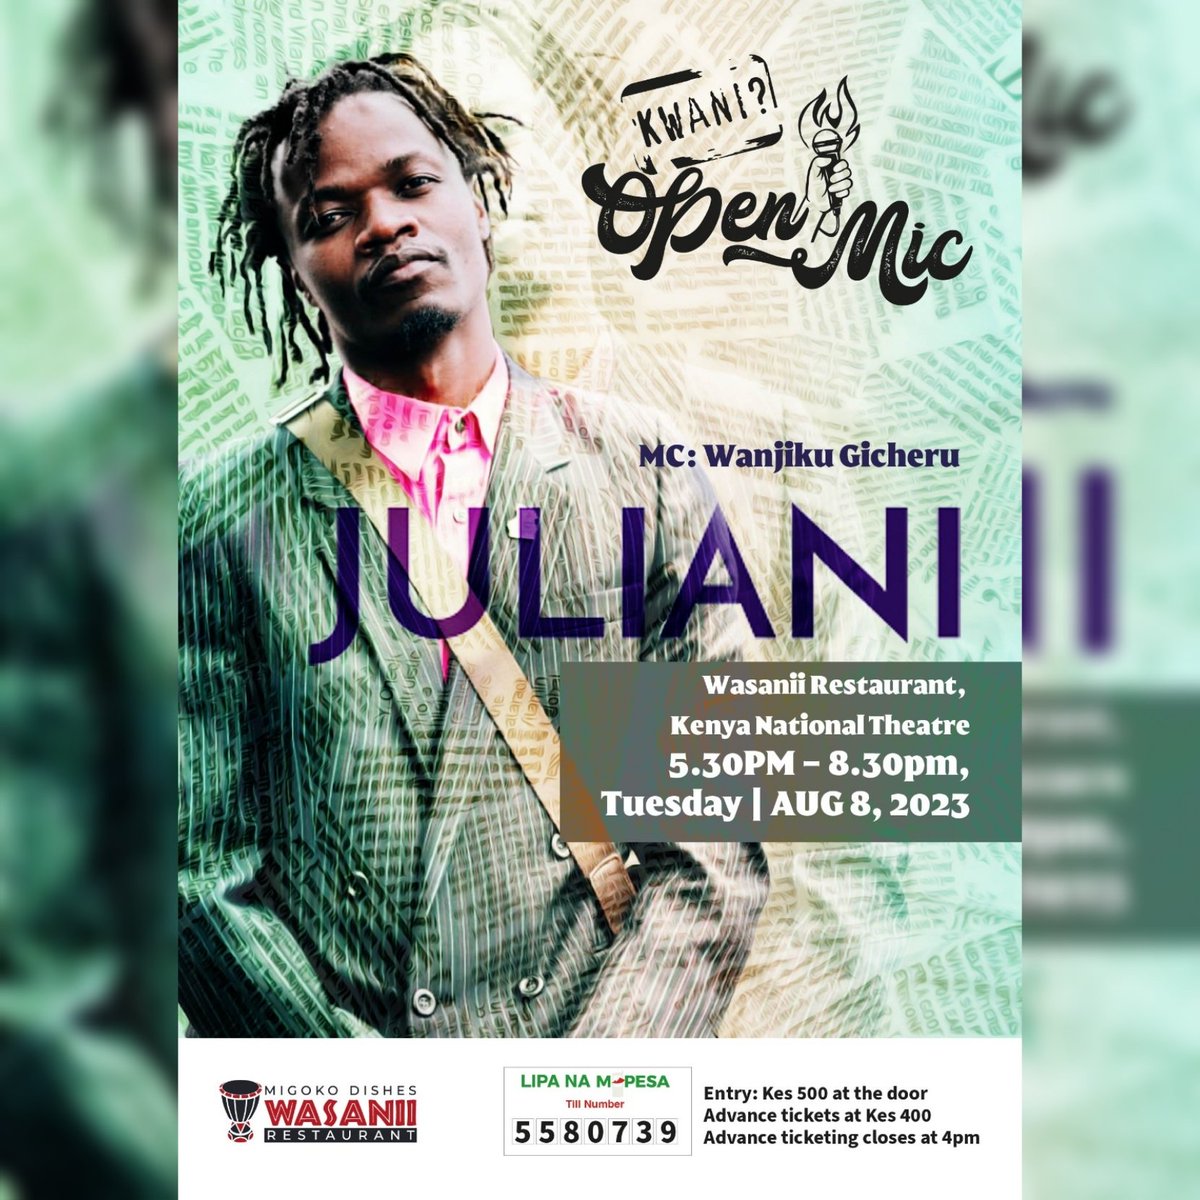 We're ready. We're back. We'll be fire.

With @JulianiKenya

#nairobifinest #poetry254 #kenyapoetry #openmic